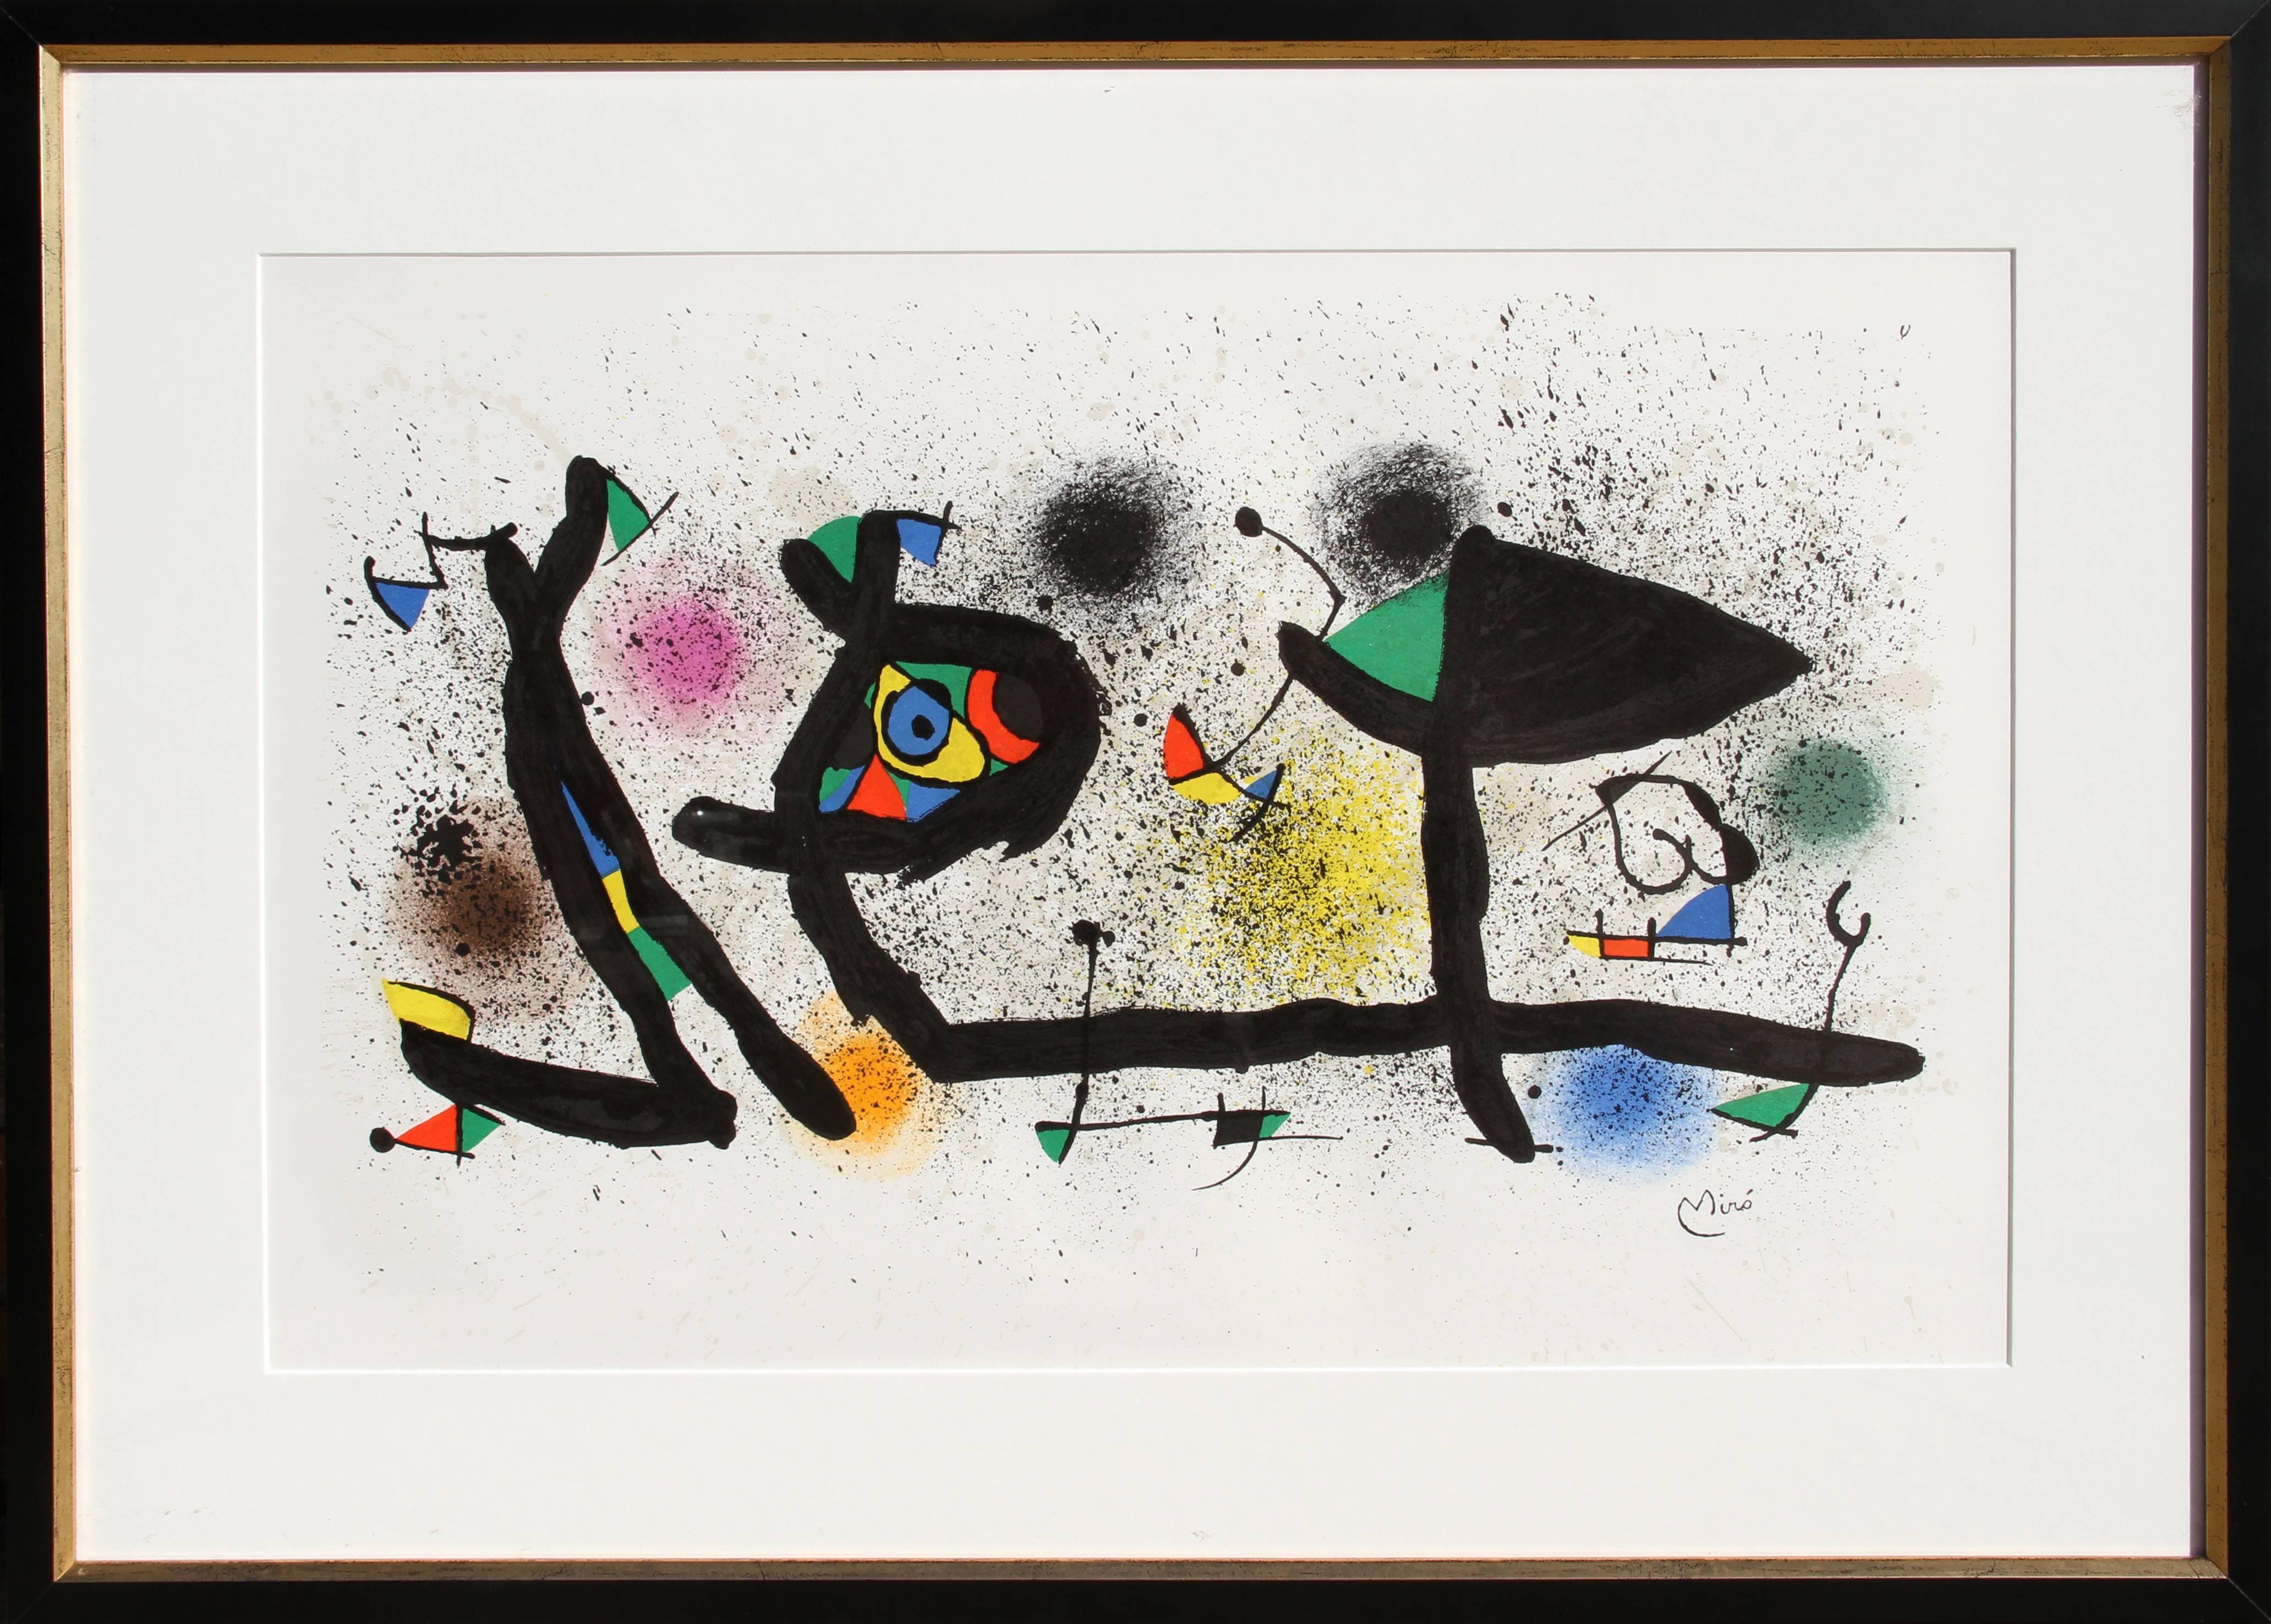 Joan Miró Abstract Print - Sculptures (M. 950), Framed Lithograph by Joan Miro